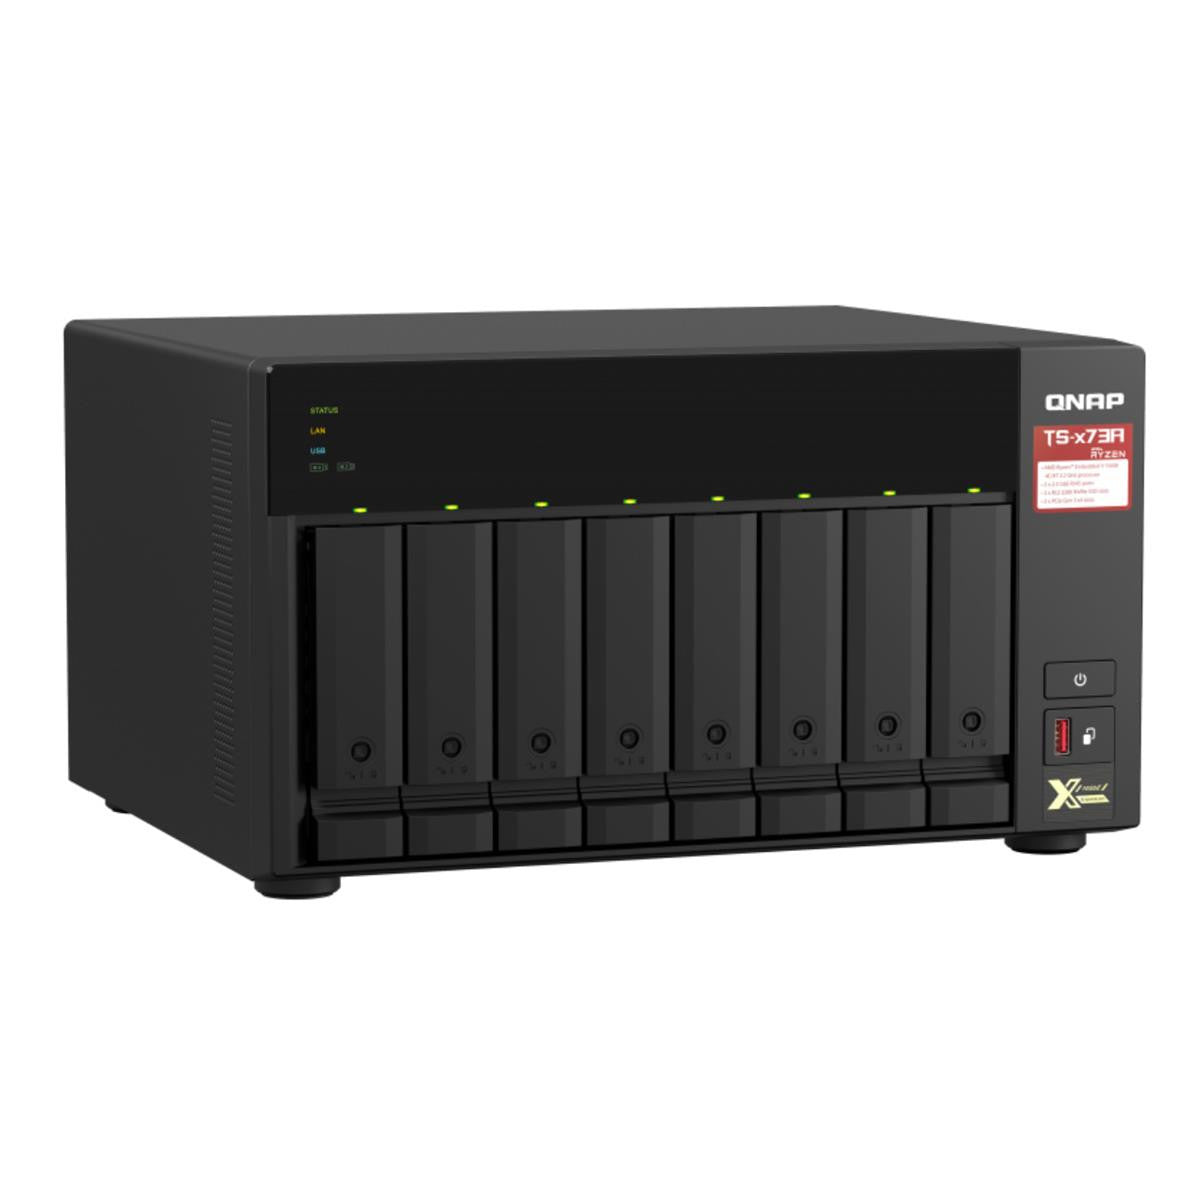 QNAP TS-873A 8-BAY NAS with 32GB DDR4 RAM and 80TB (8x10TB) Seagate Ironwolf NAS Drives Fully Assembled and Tested